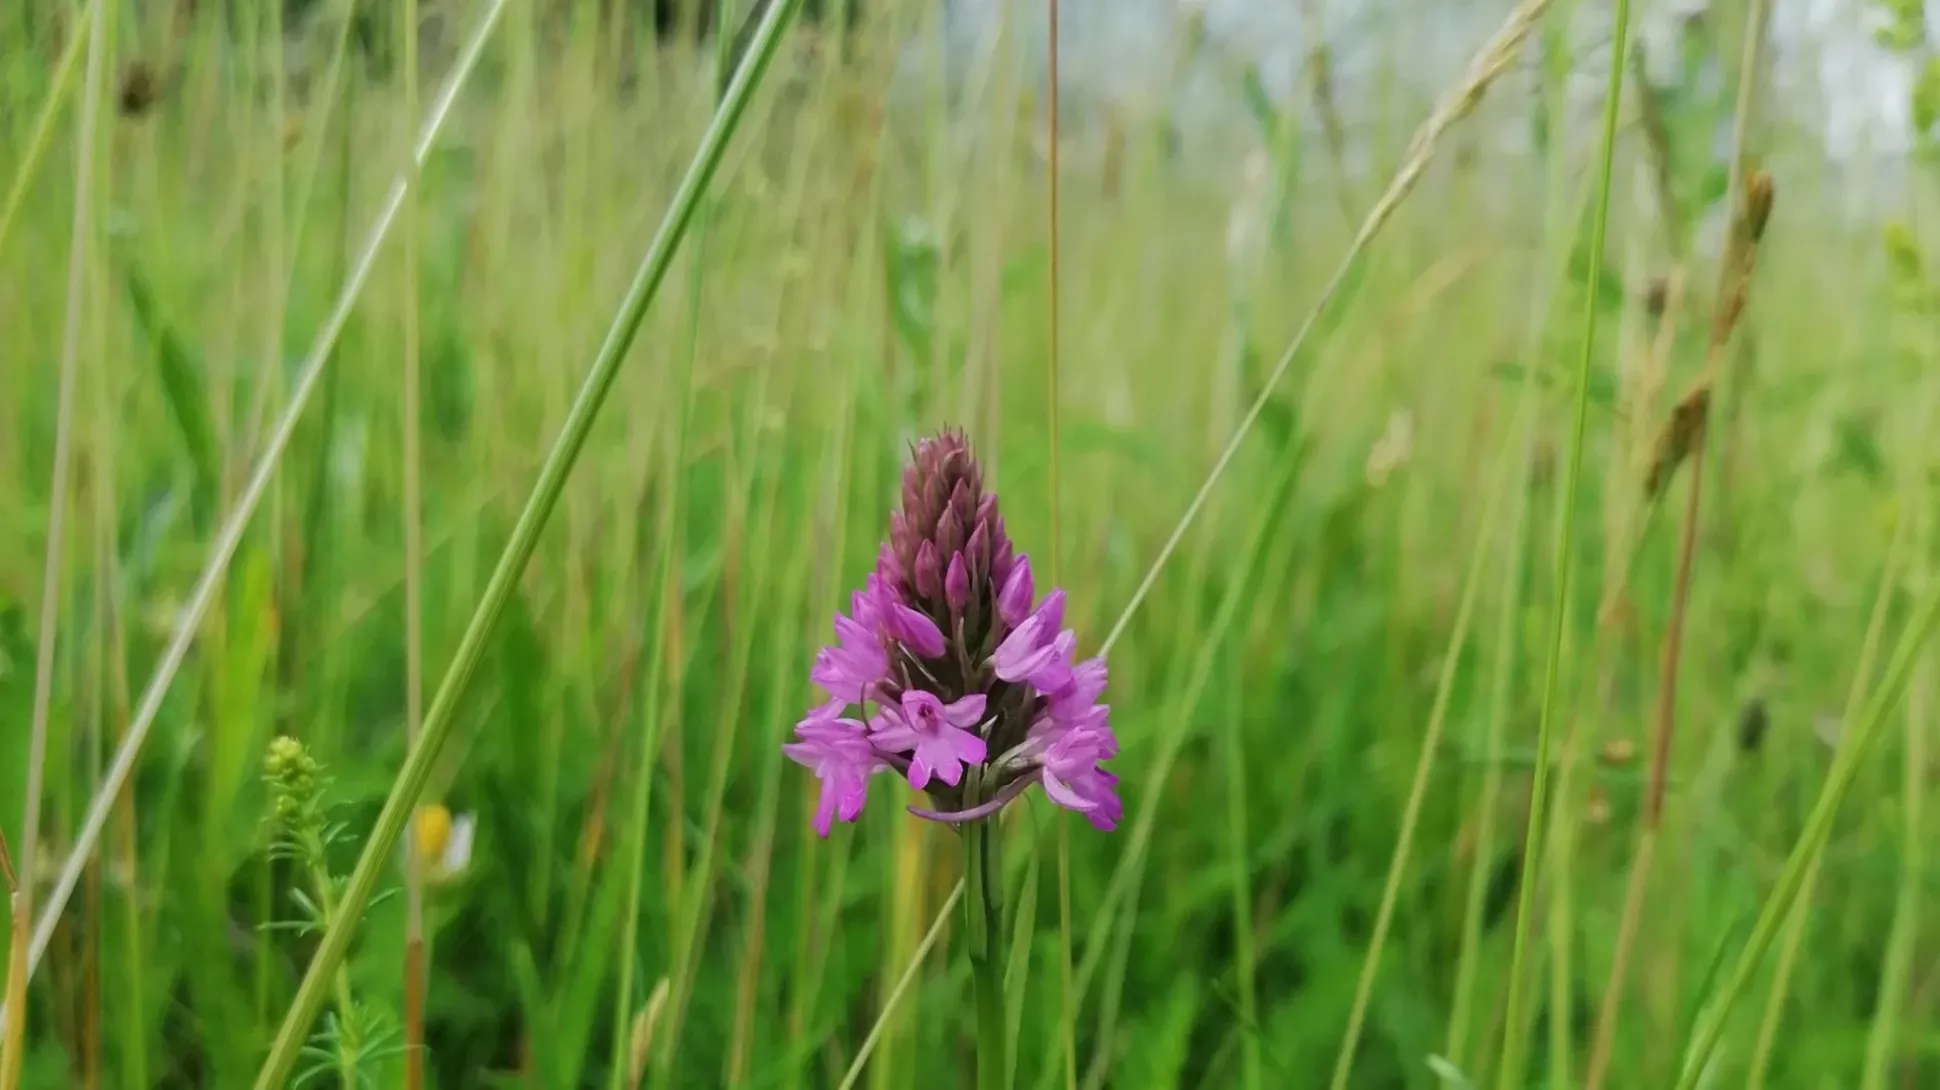 A bright purple orchid in a green wildflower field